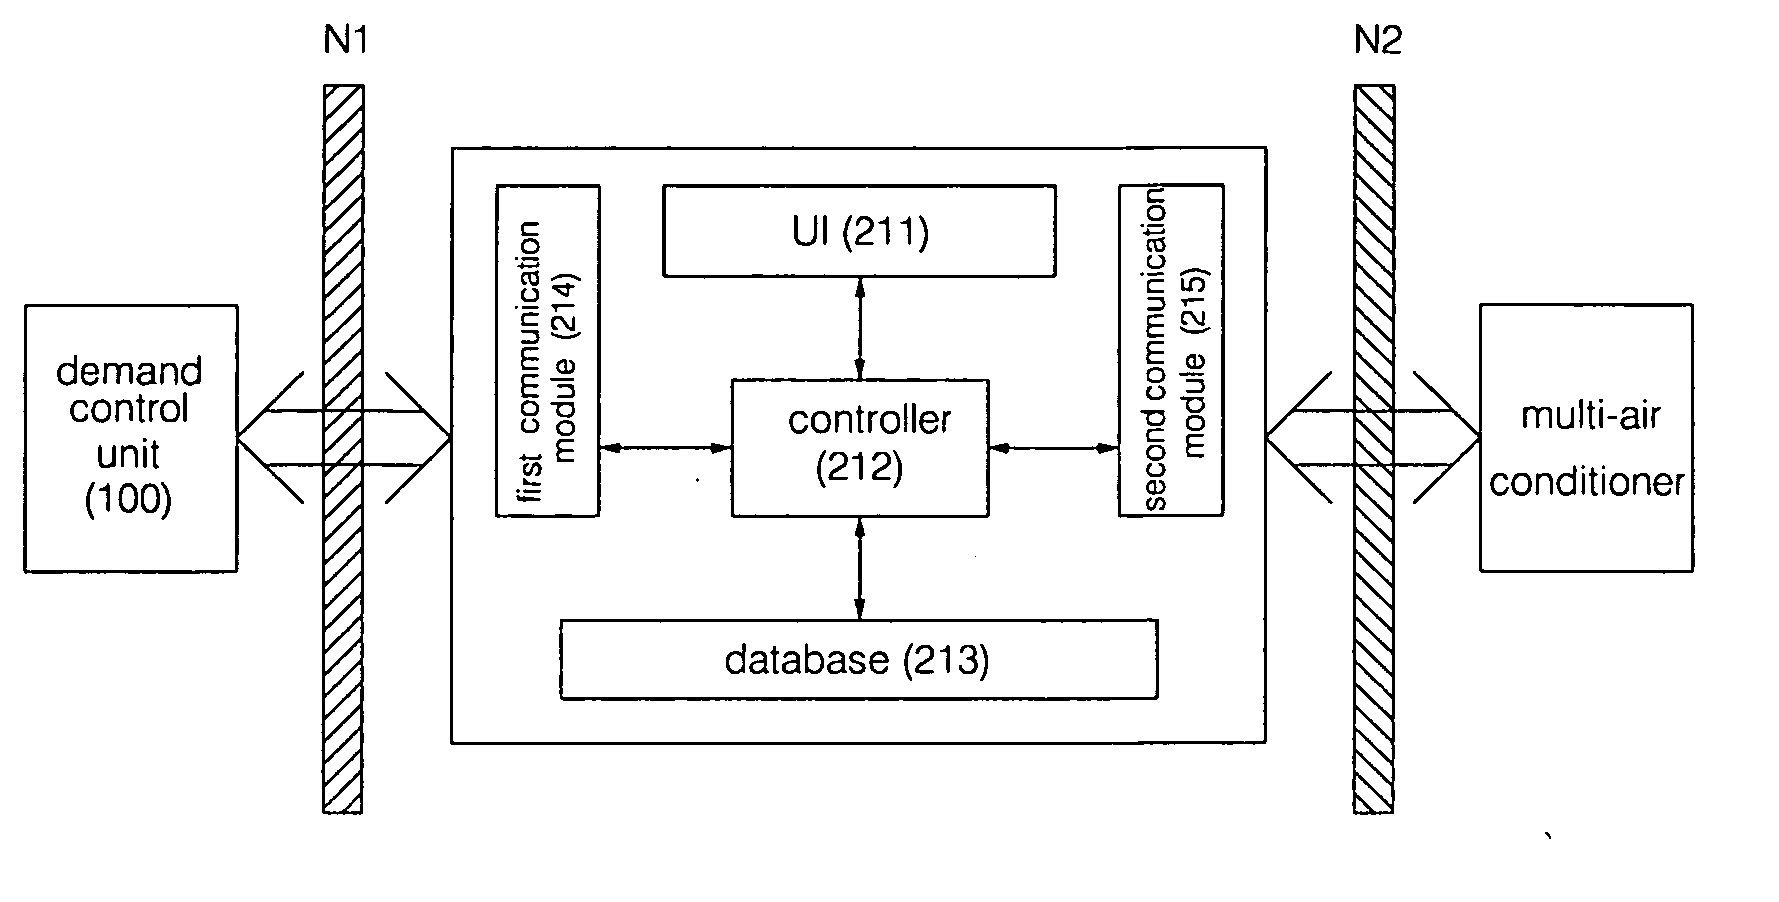 Multi-air conditioner peak power control system and control method thereof